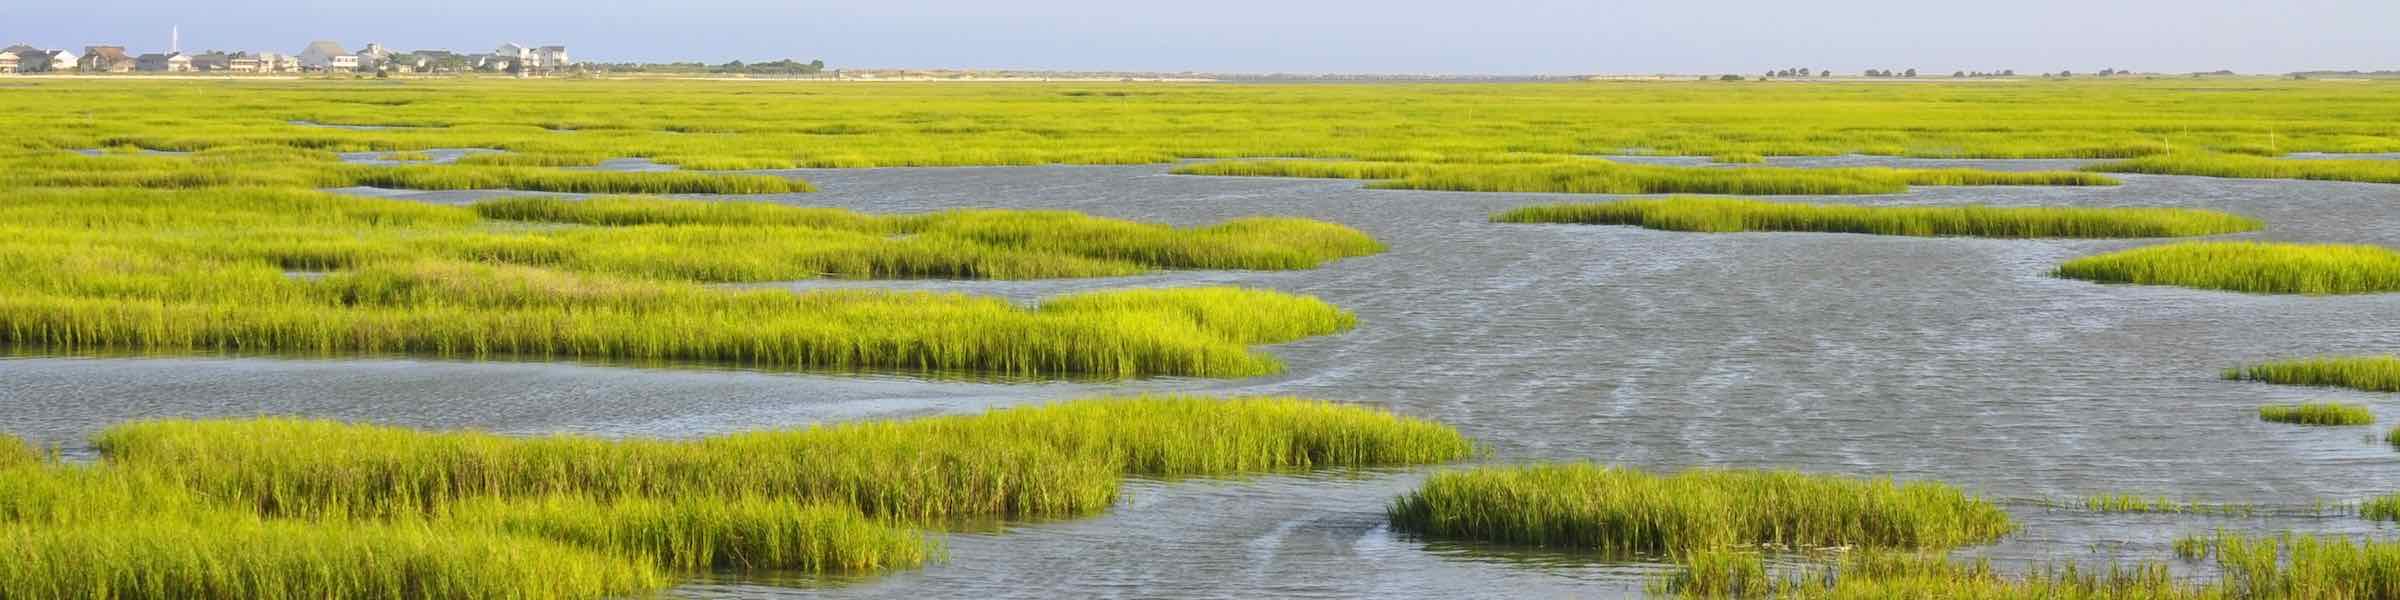 The marshes at Murrells Inlet, SC.